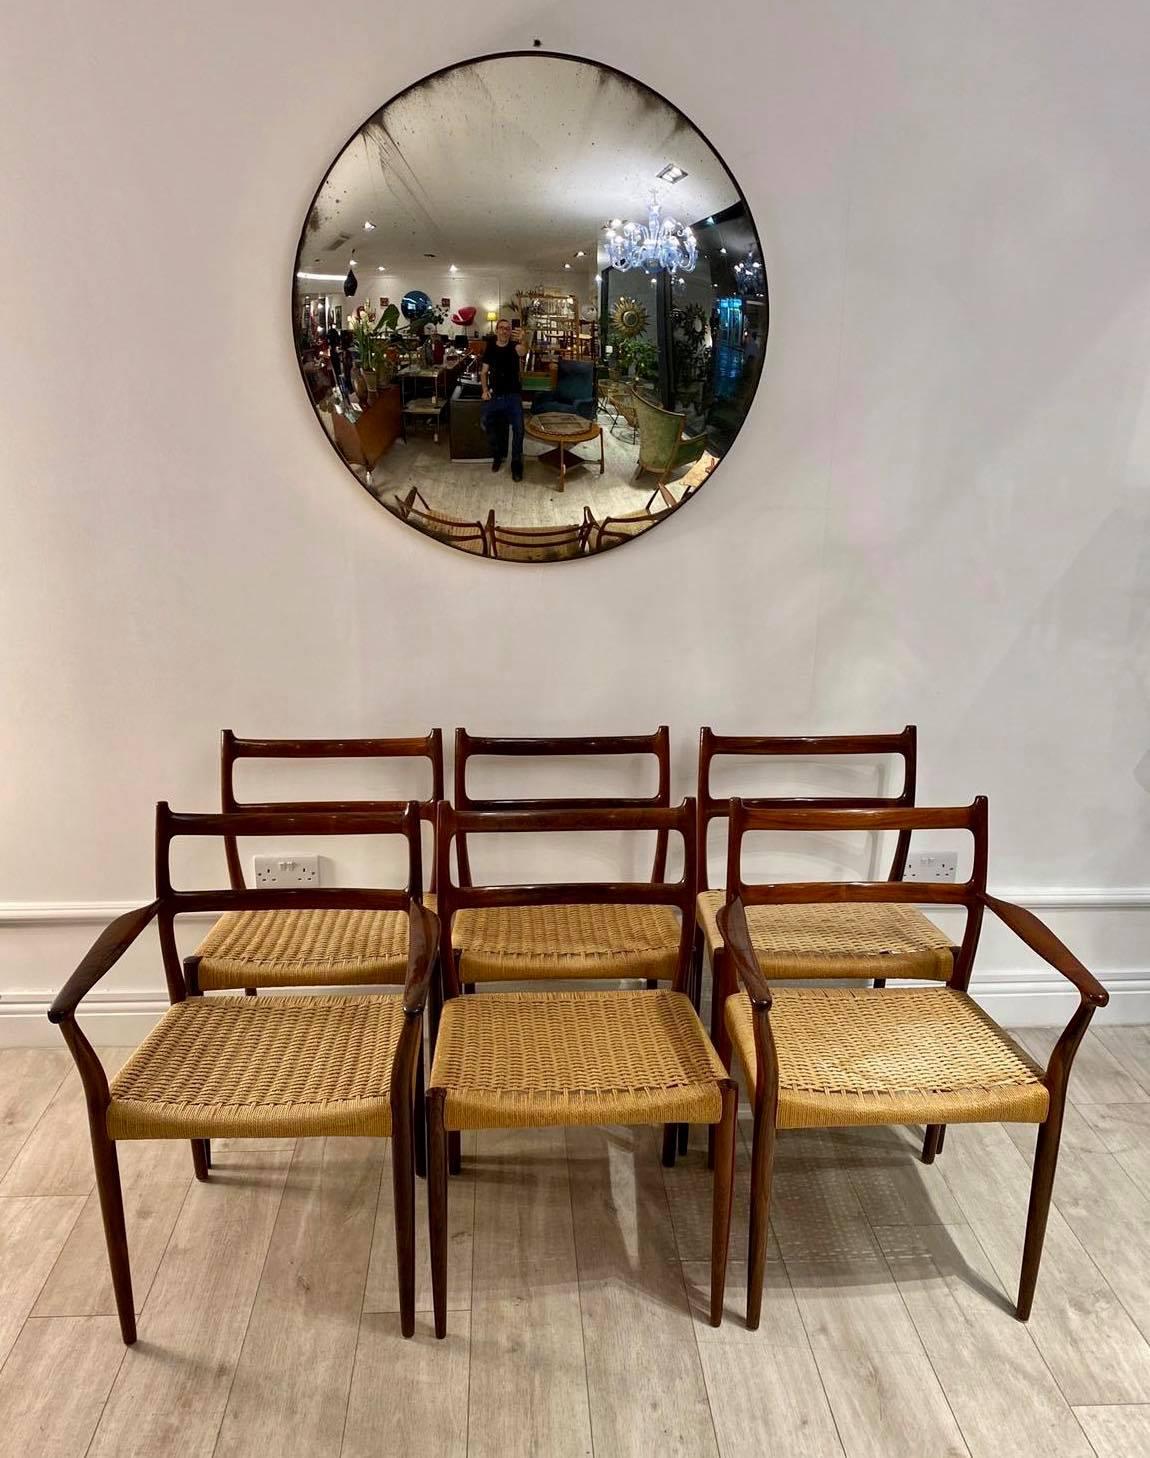 A stunning and extremely rare set of Danish solid rosewood dining chairs with woven string seats.

This set were made by Soren Ladefoged in the 1960s for Danish makers Mobler.

They are in superb condition throughout, the frames are a beautiful,